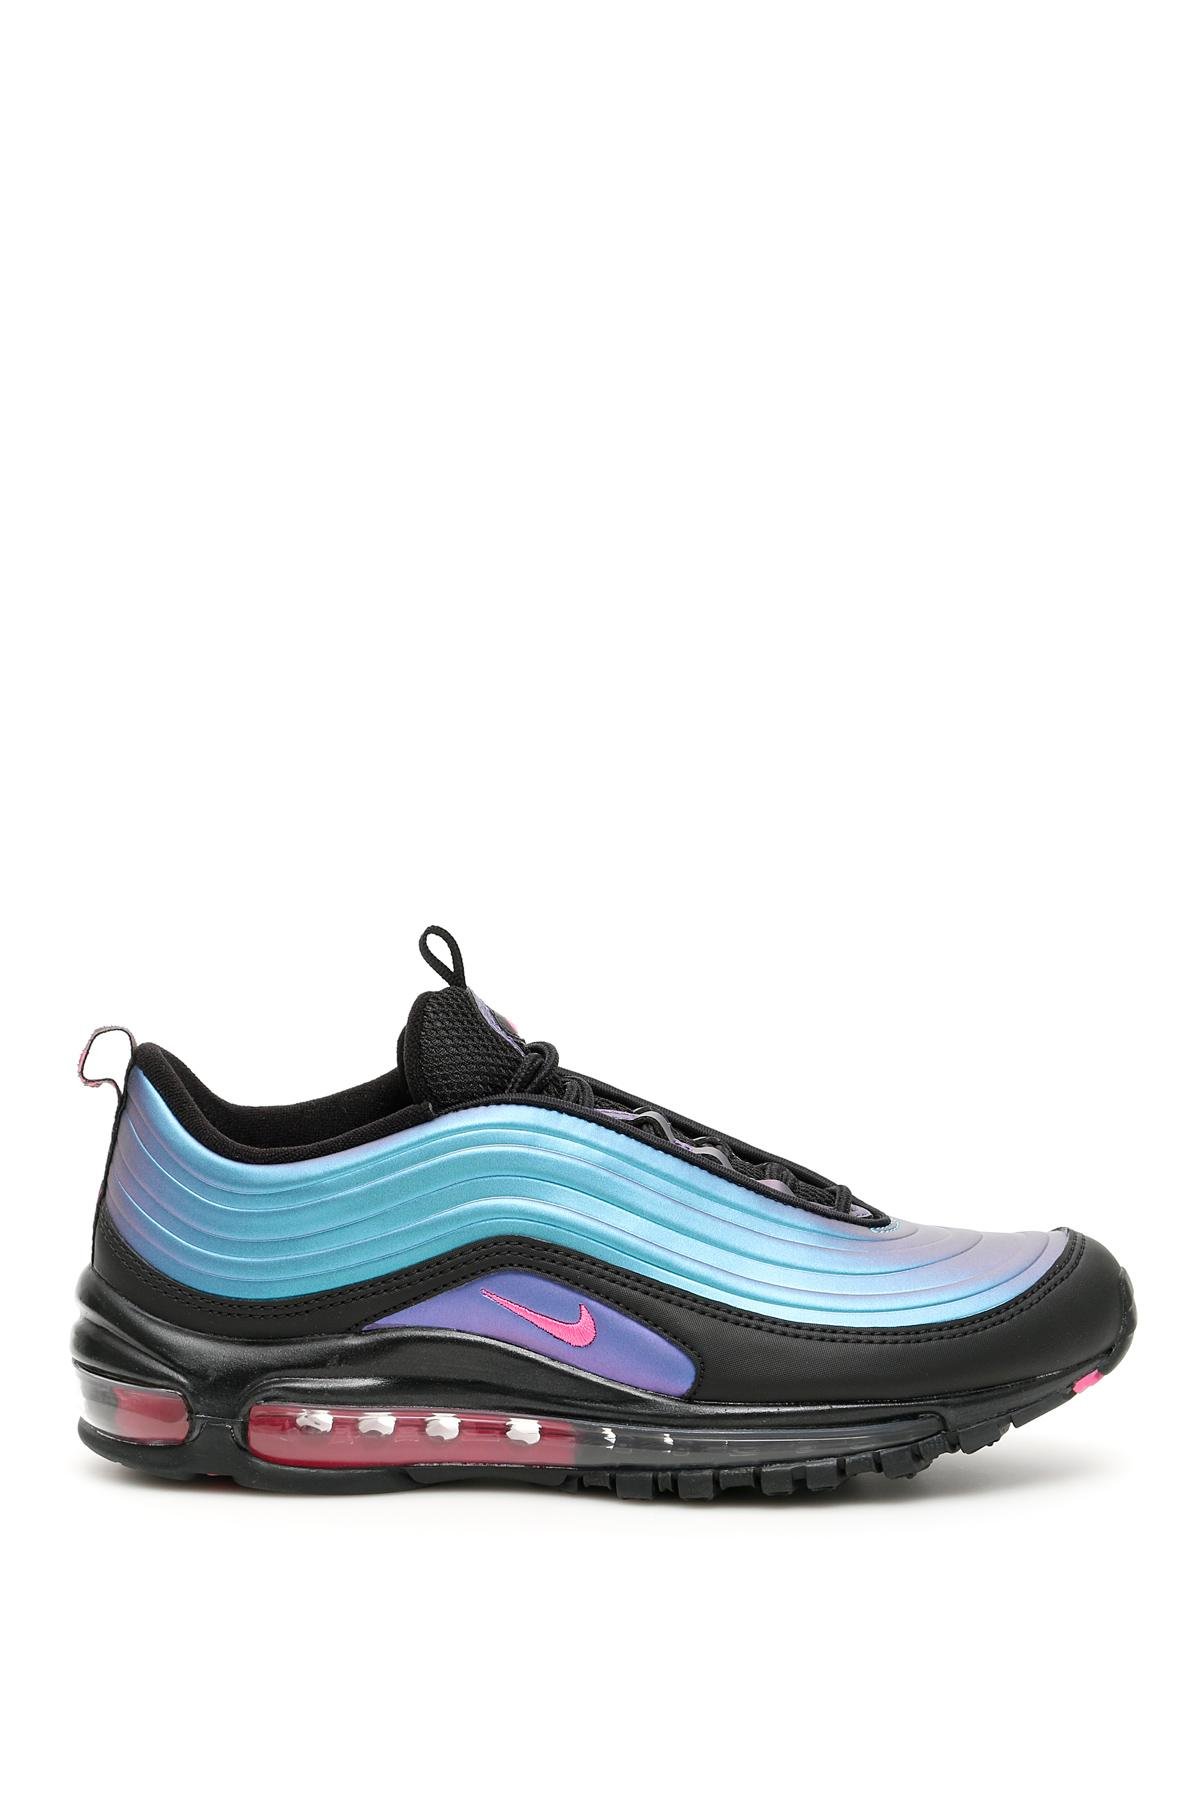 education darkness pause Nike Air Max 97 Lx Sneakers in Black,Purple,Light Blue (Blue) for Men | Lyst